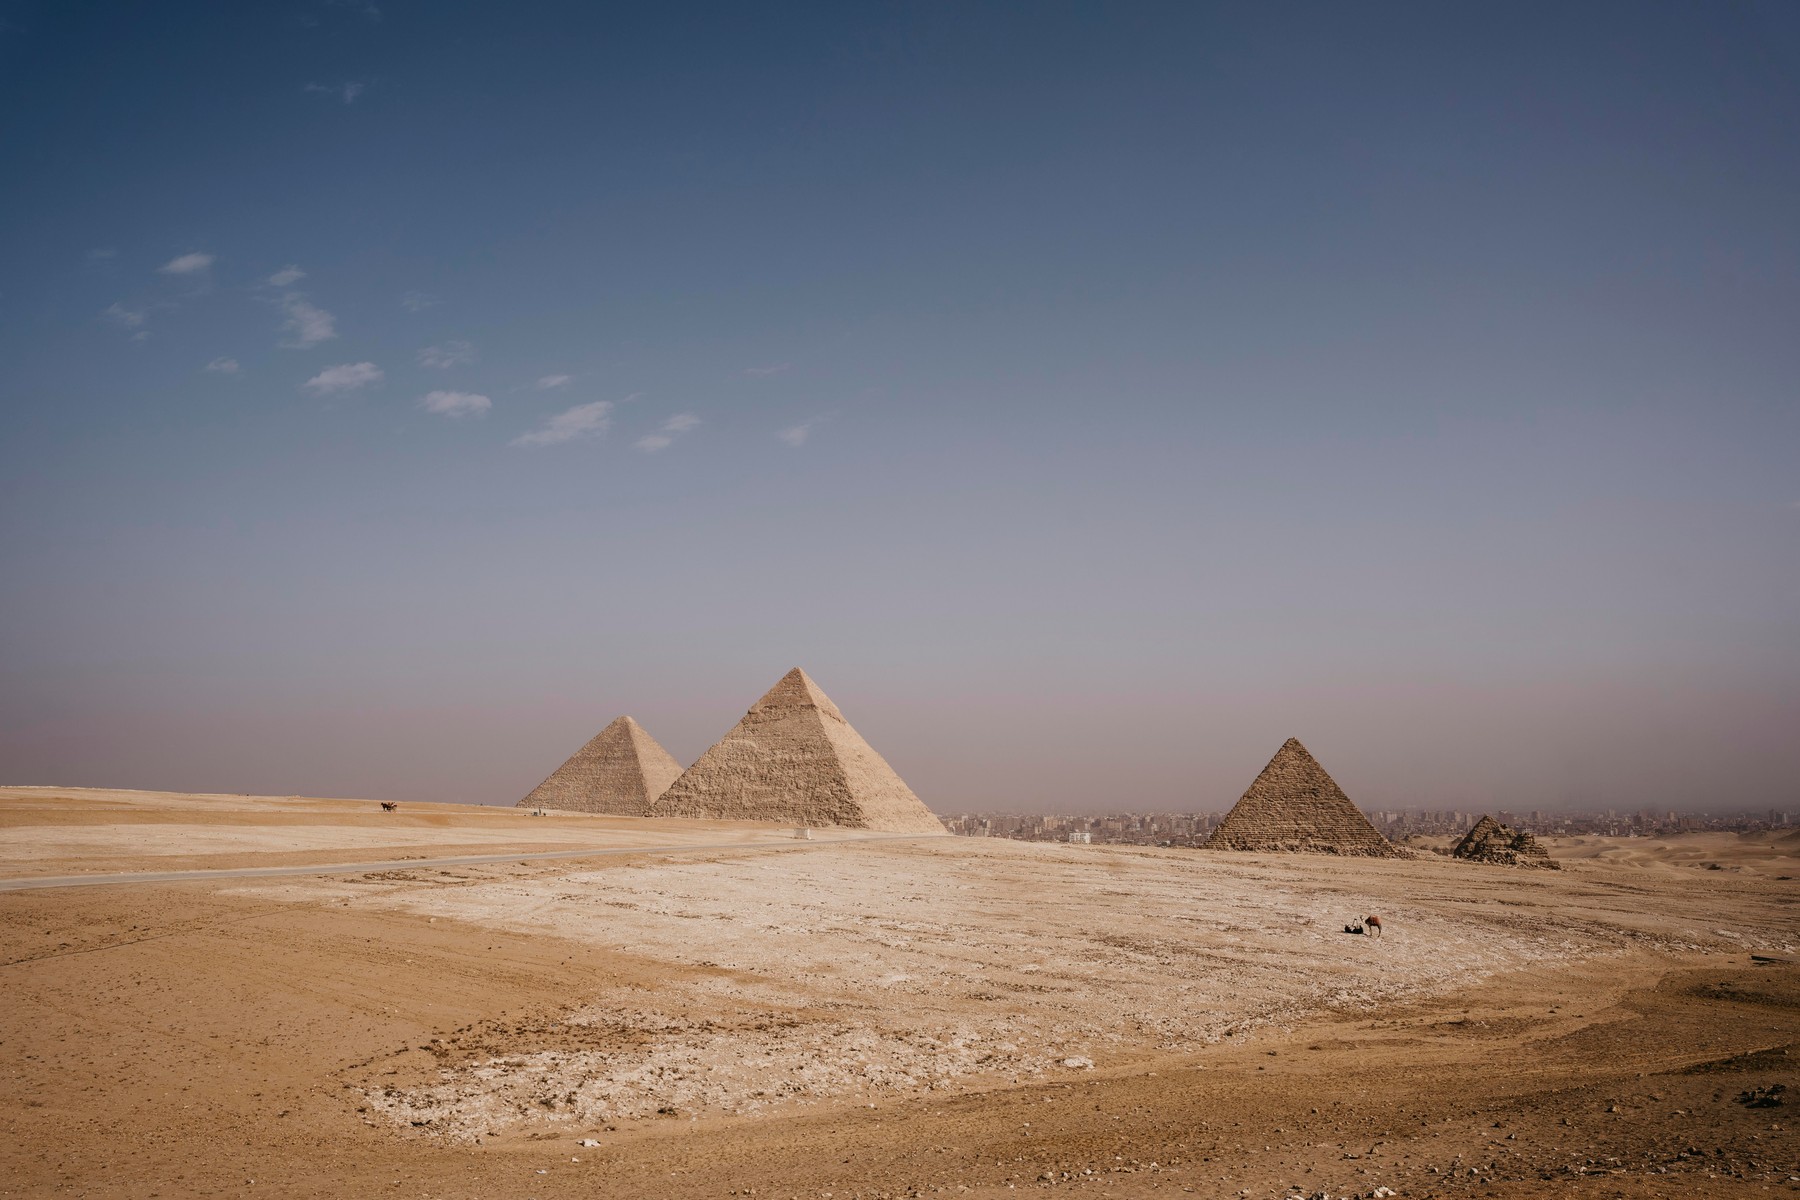 They have found something in Egypt that they have never seen before: they can solve the secret of the pyramids